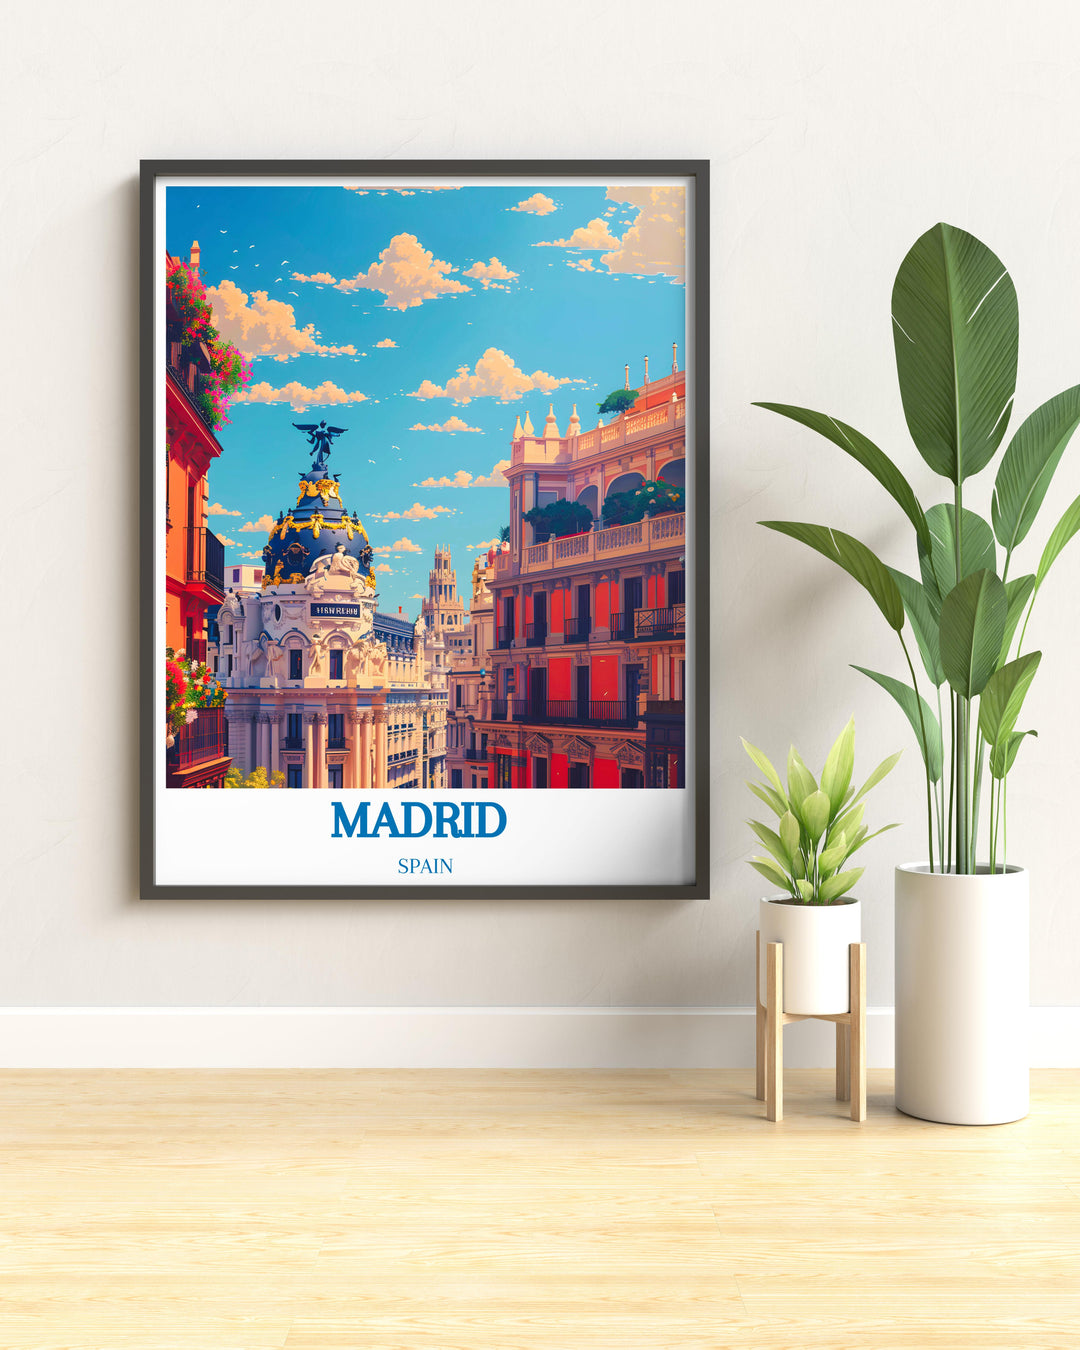 Vintage poster of Madrid, capturing the historical essence of the citys famous landmarks.